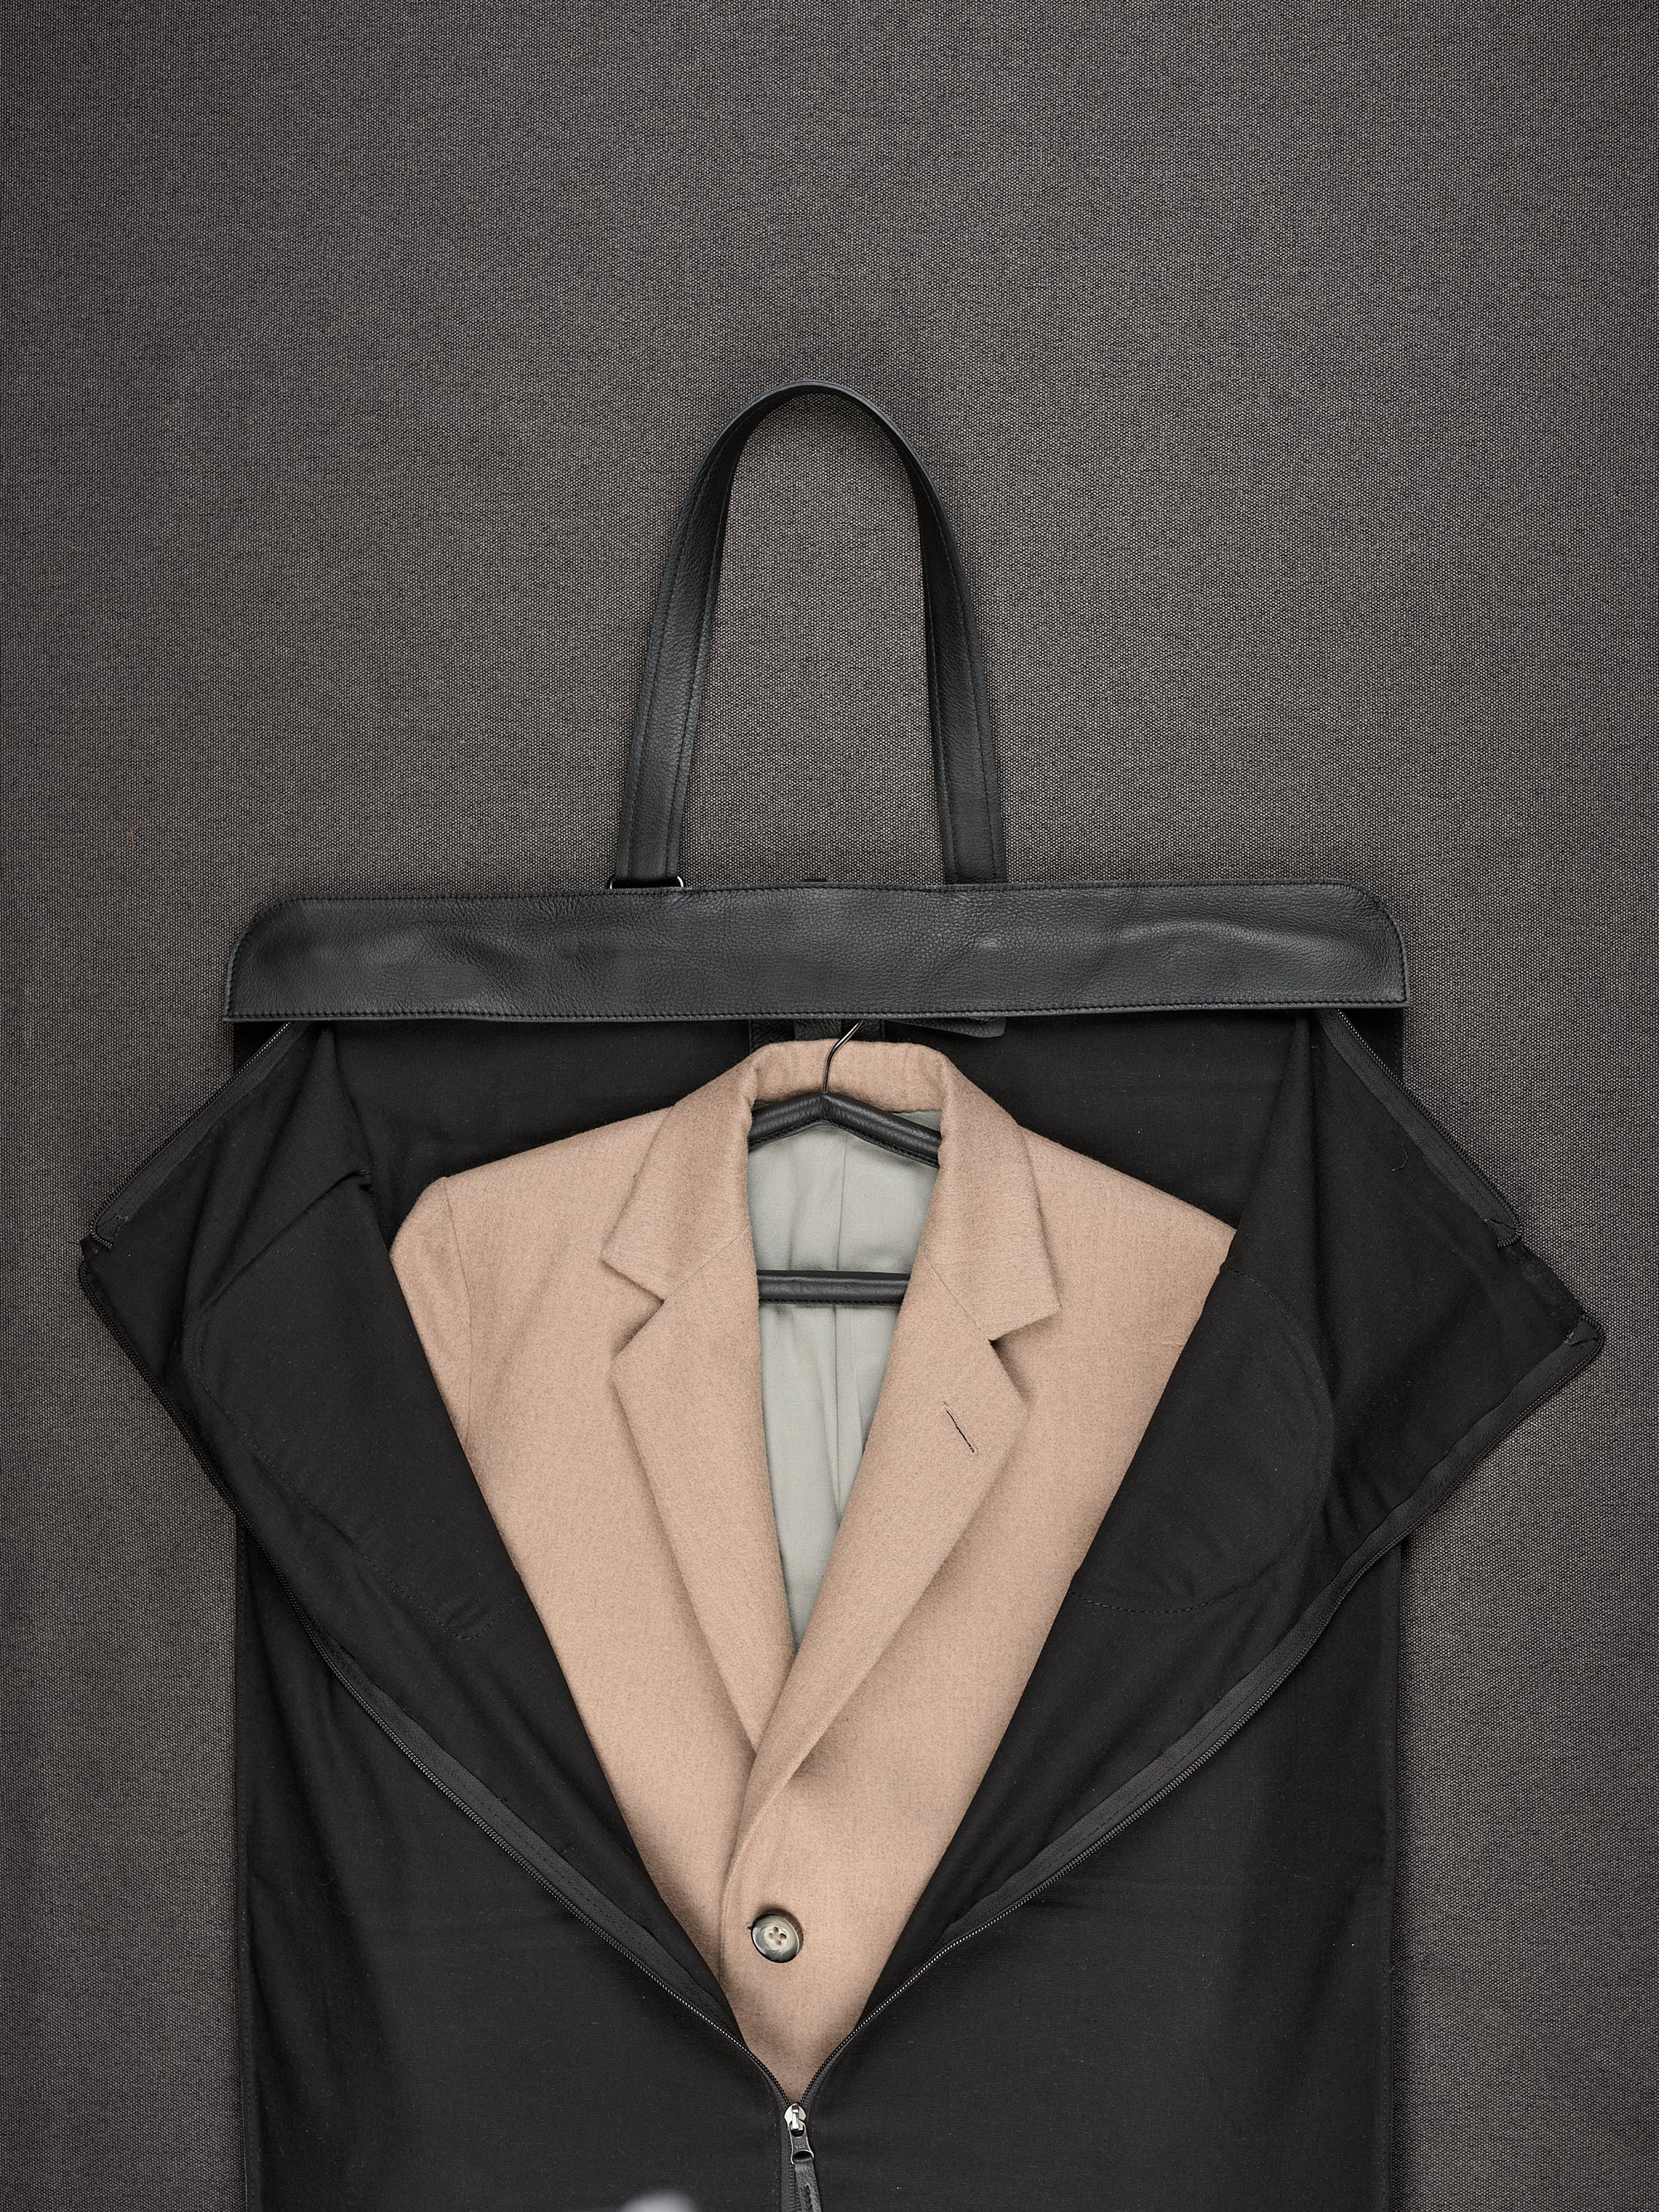 Carry-on Garment Bag Black by Capra Leather